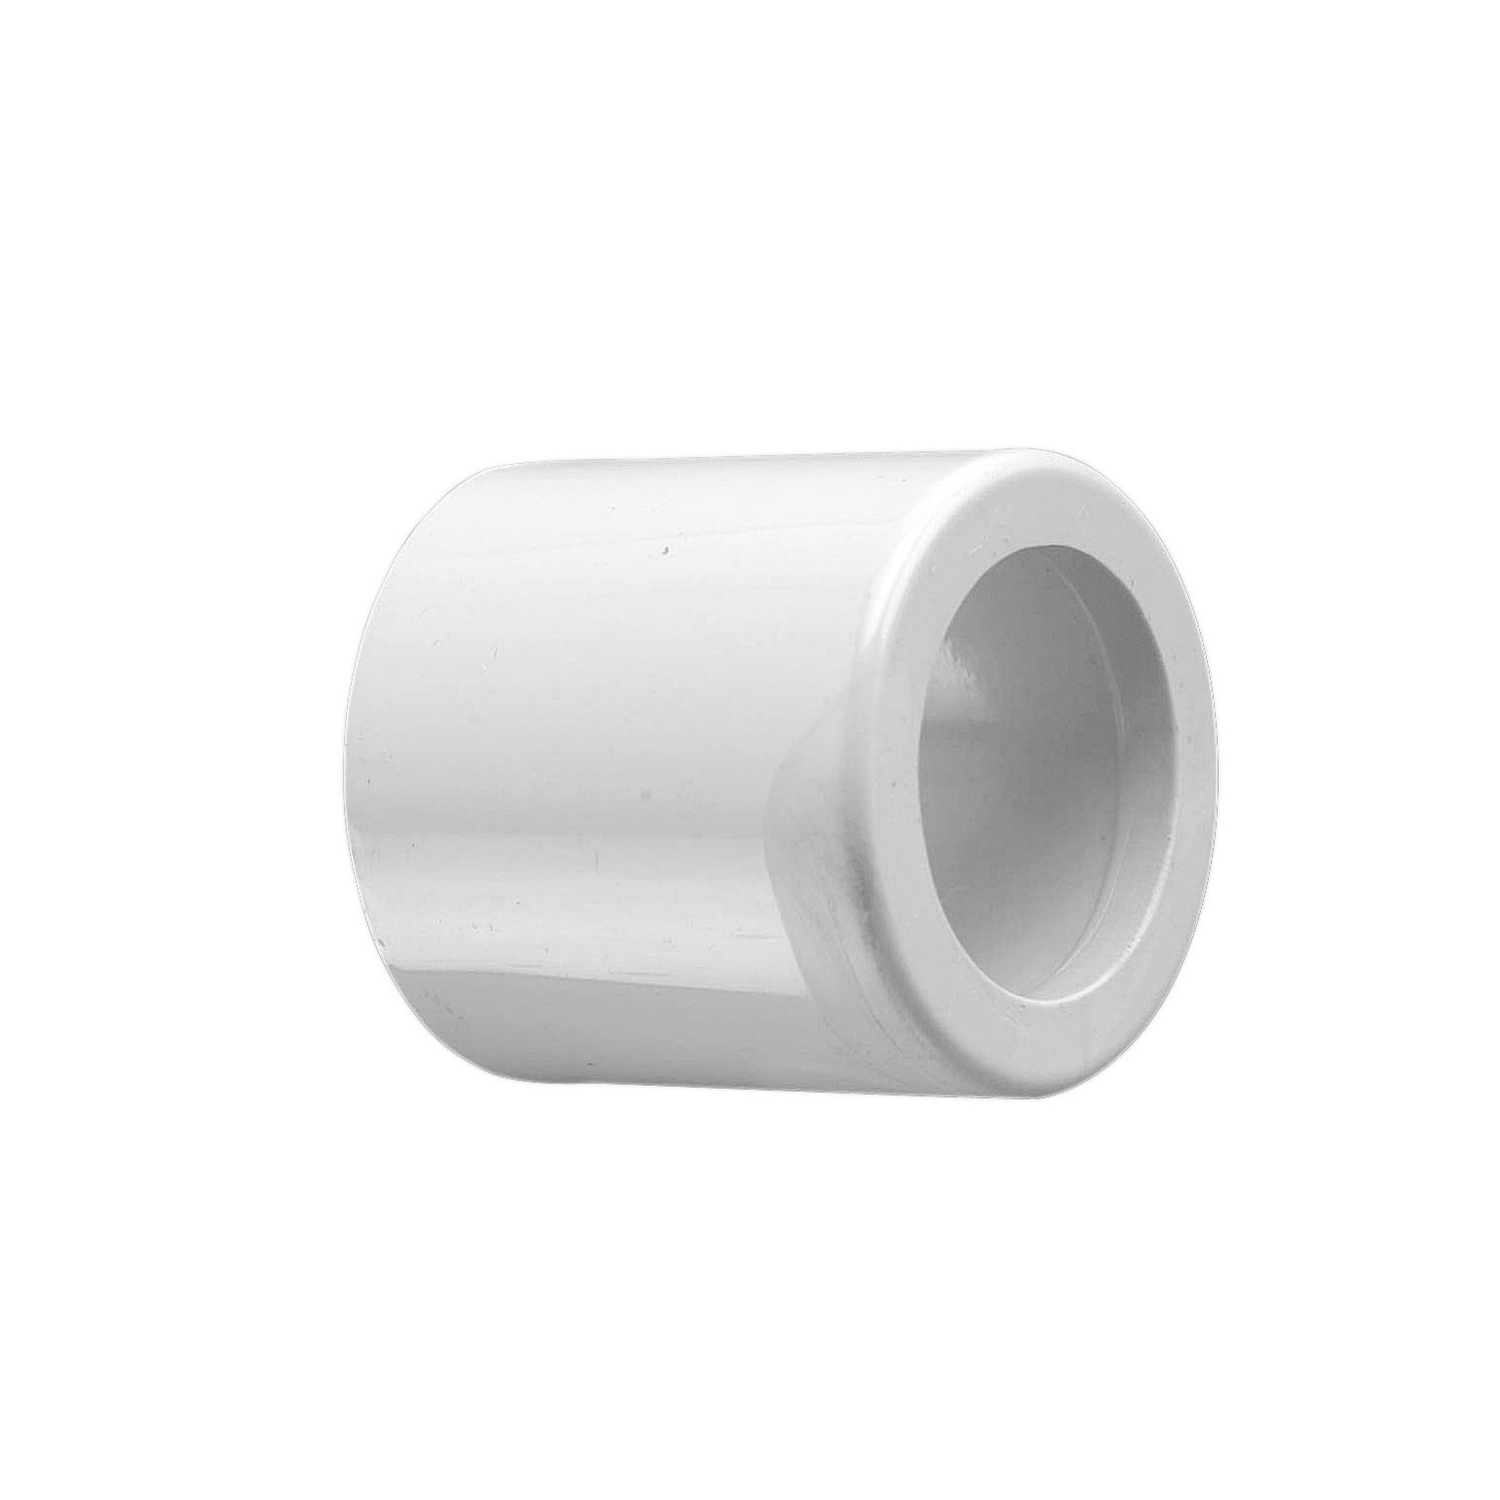 Solid Fittings - PVC, Plain Reducers, 25mm - 20mm, Grey